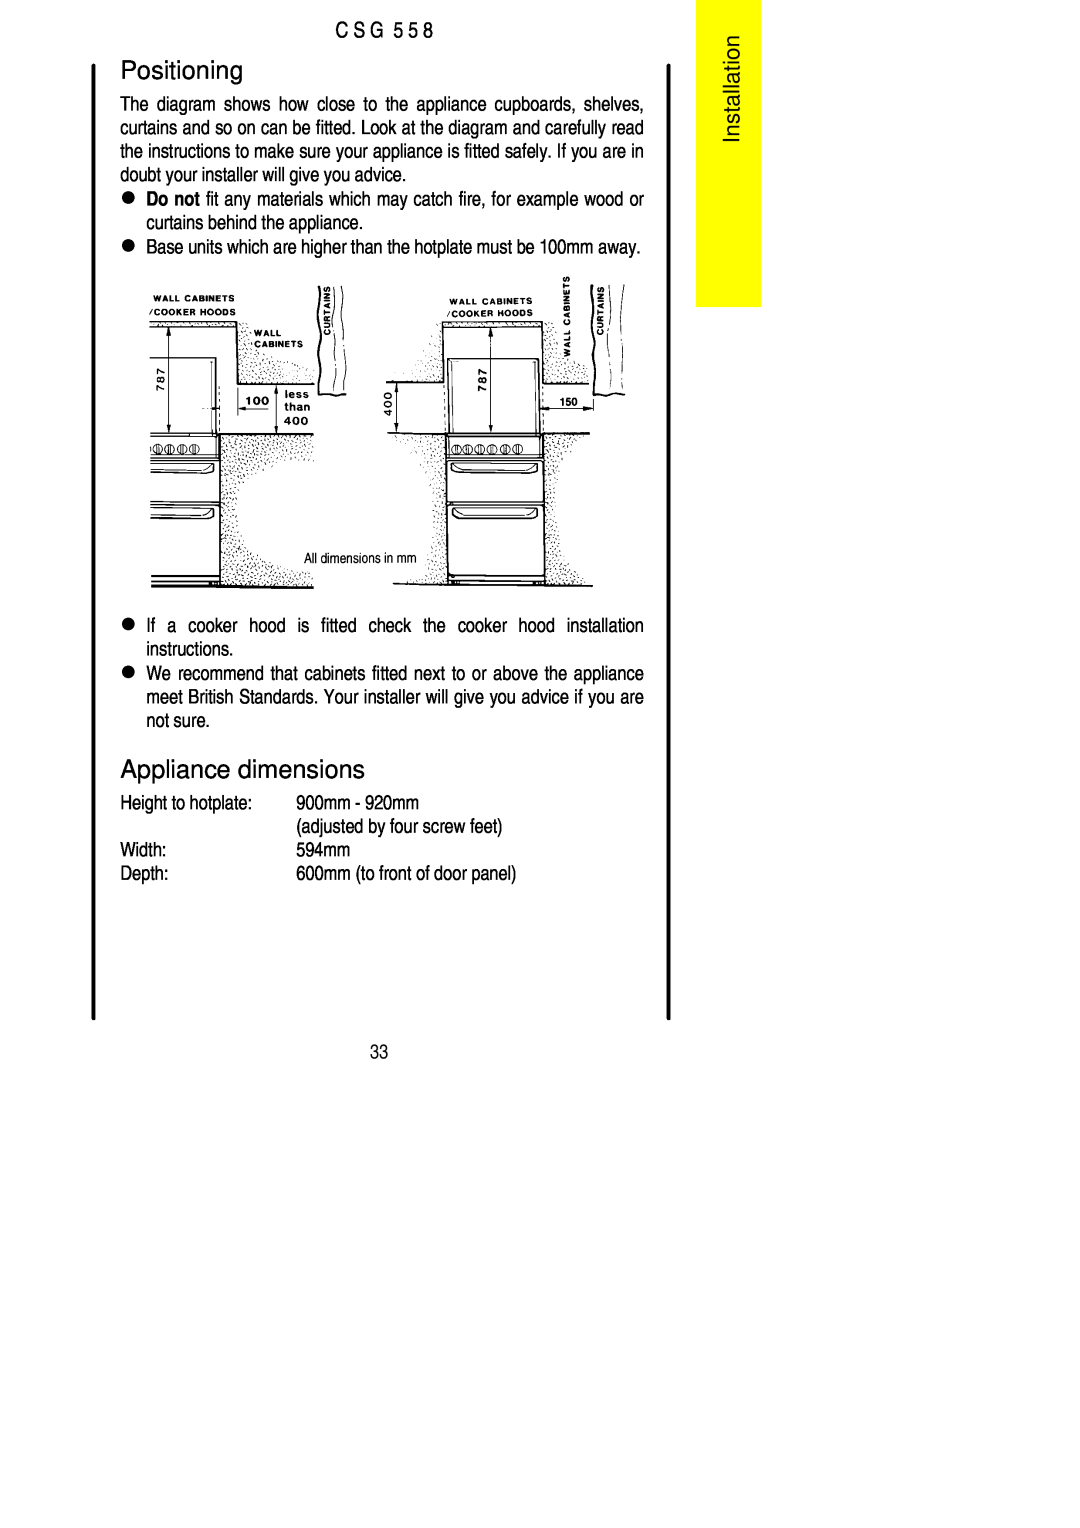 Electrolux CSG 558 installation instructions Positioning, Appliance dimensions, Installation, C S G 5 5 